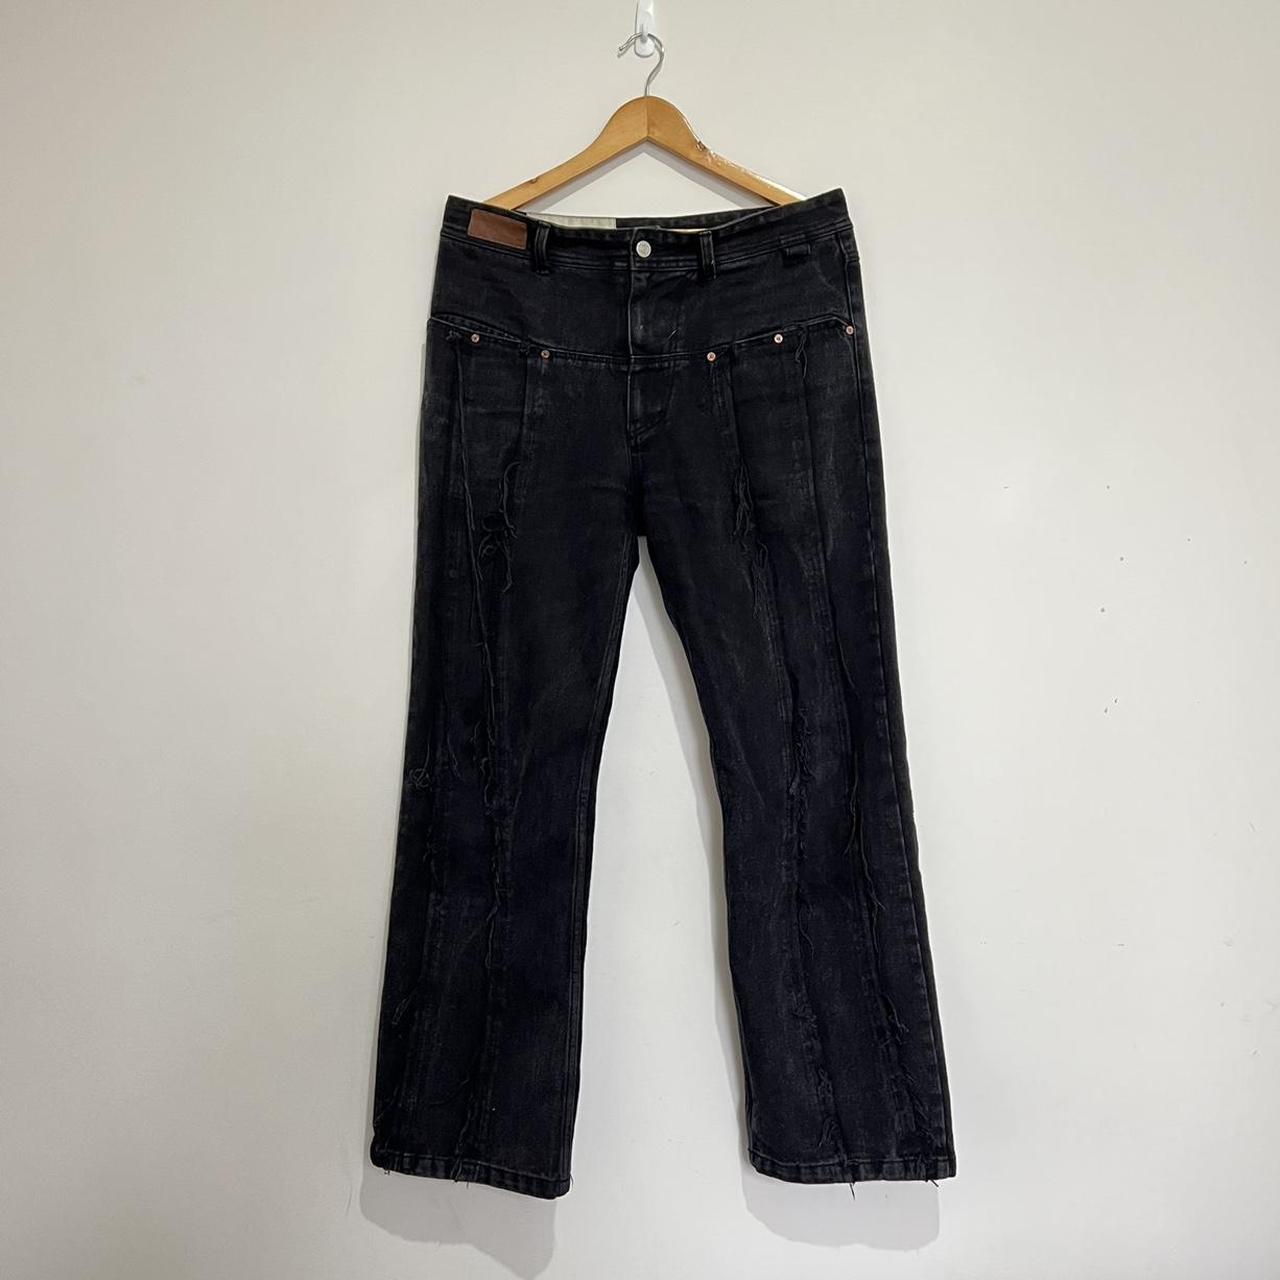 Anderson Bell Timothy Panel Jeans - Size 33... - Depop